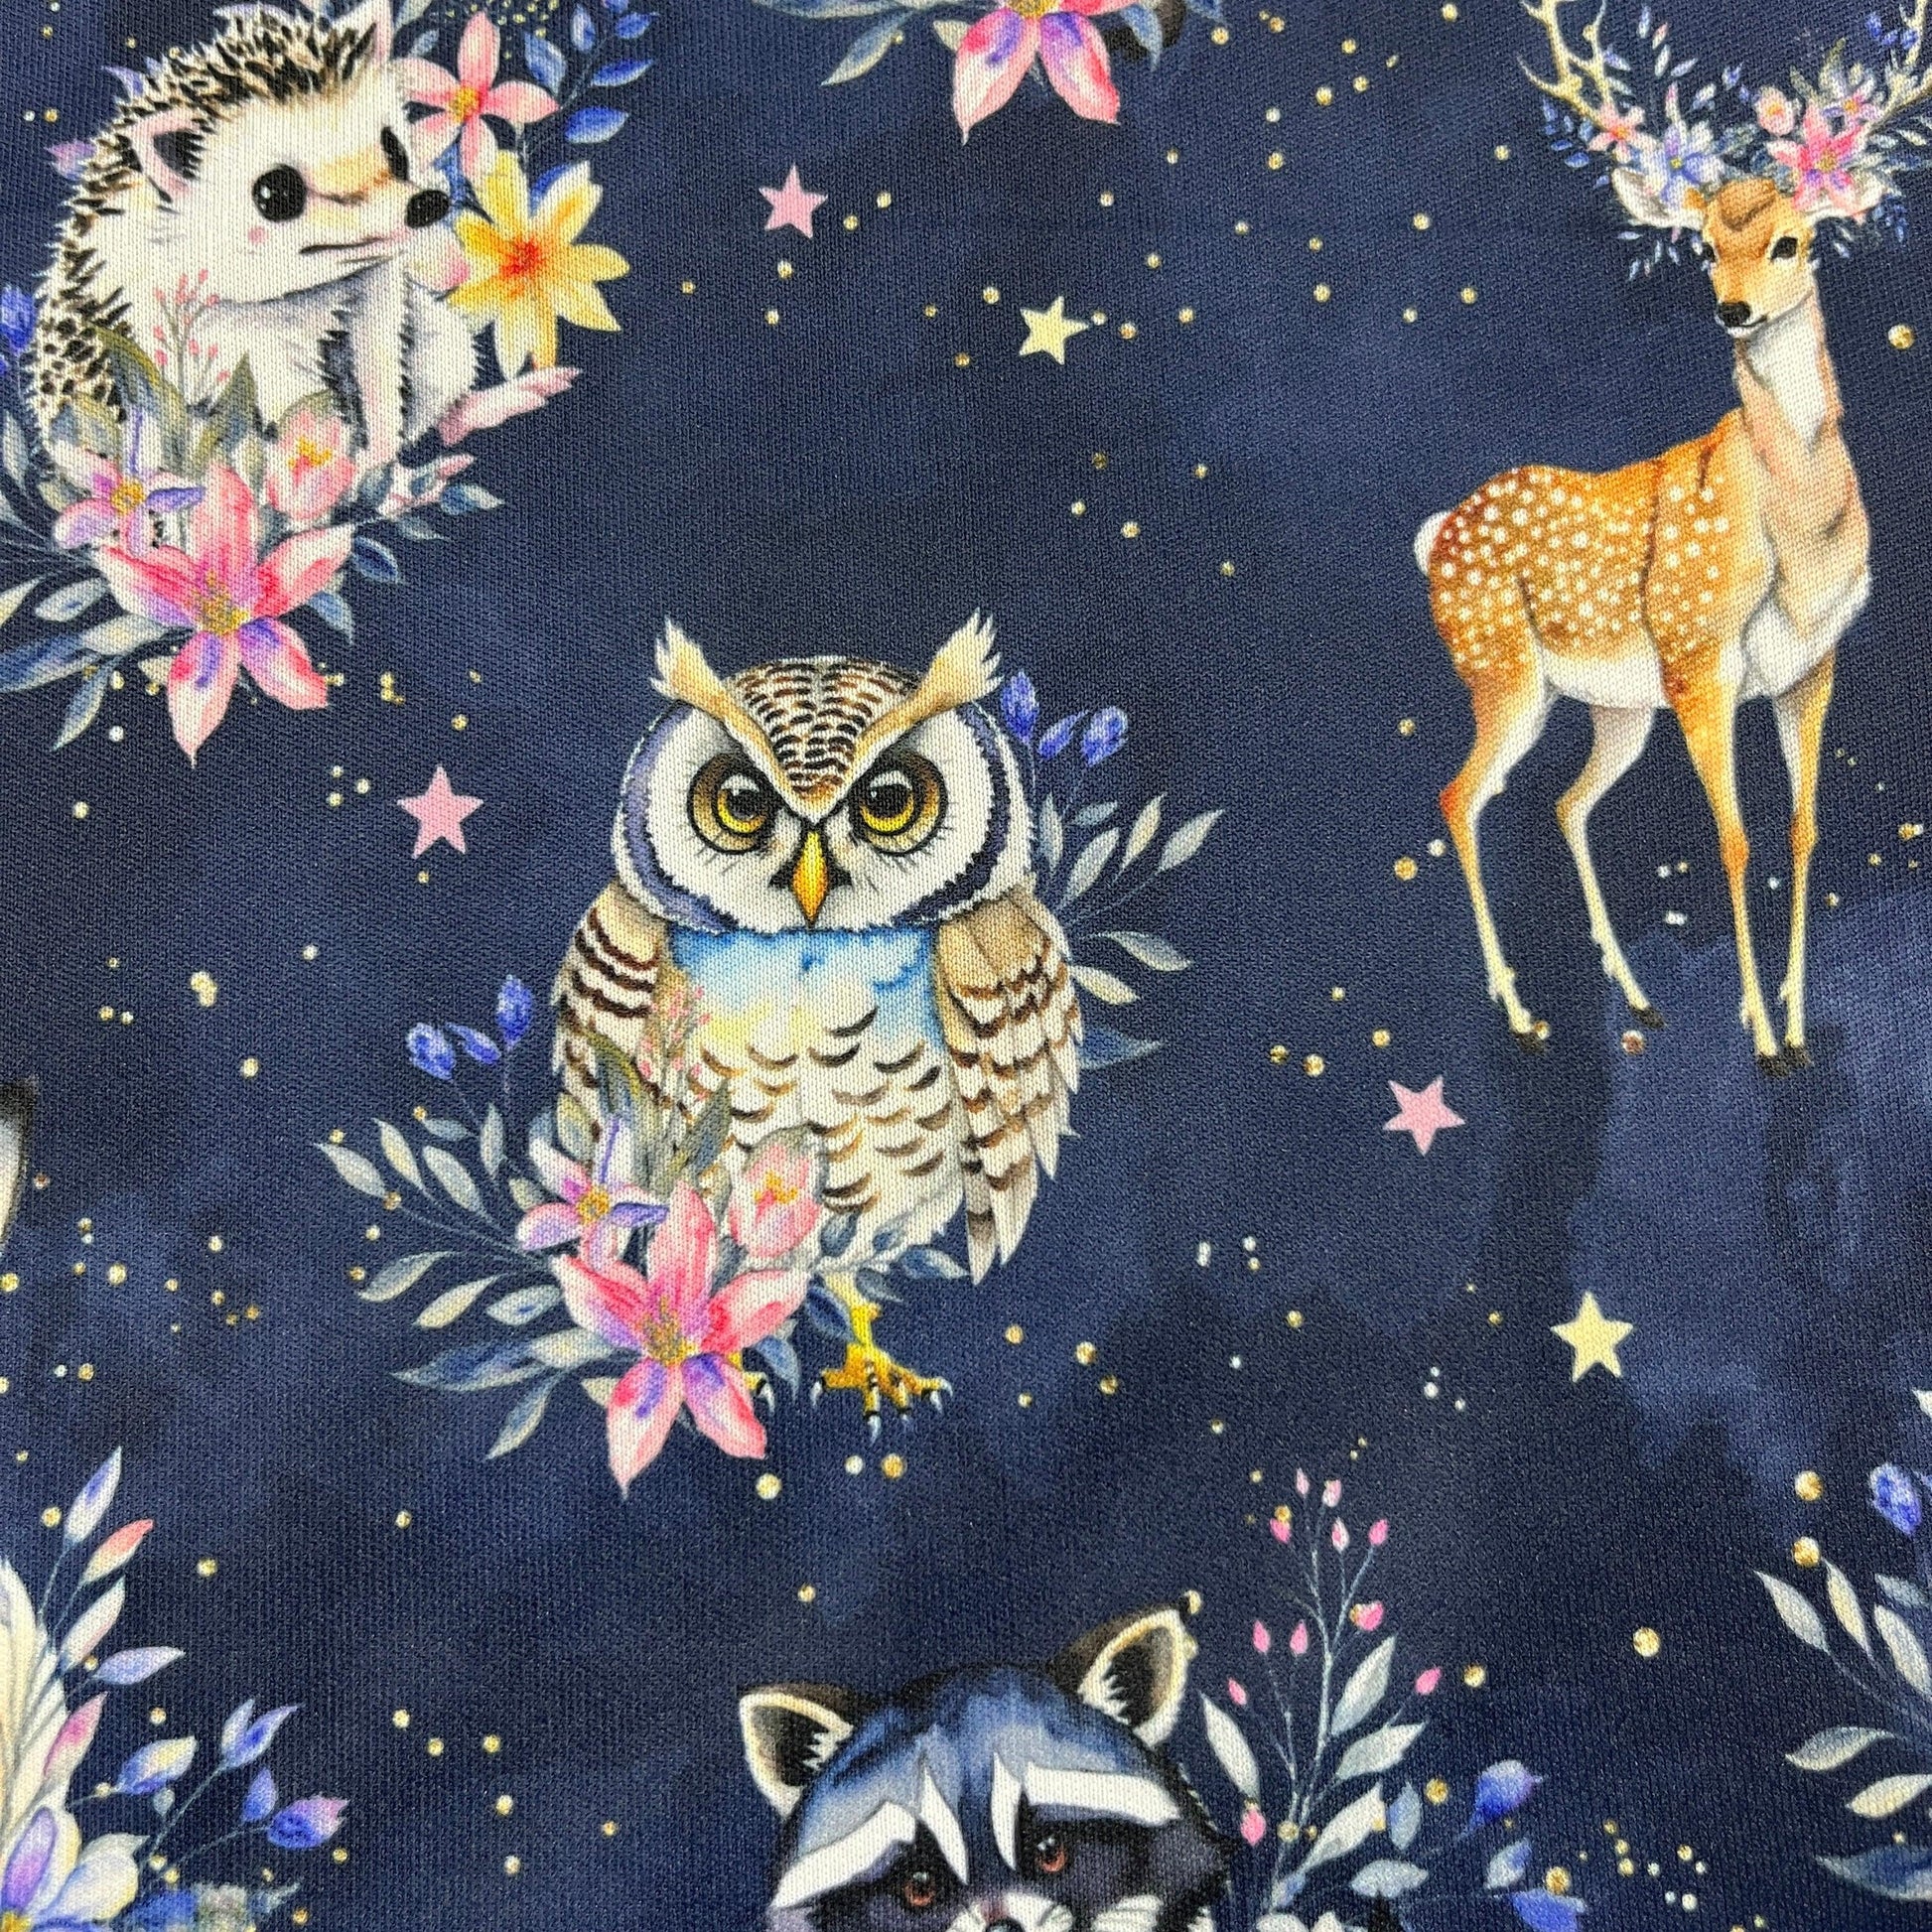 Wild Animals on Navy 1 mil PUL Fabric- Made in the USA - Nature's Fabrics